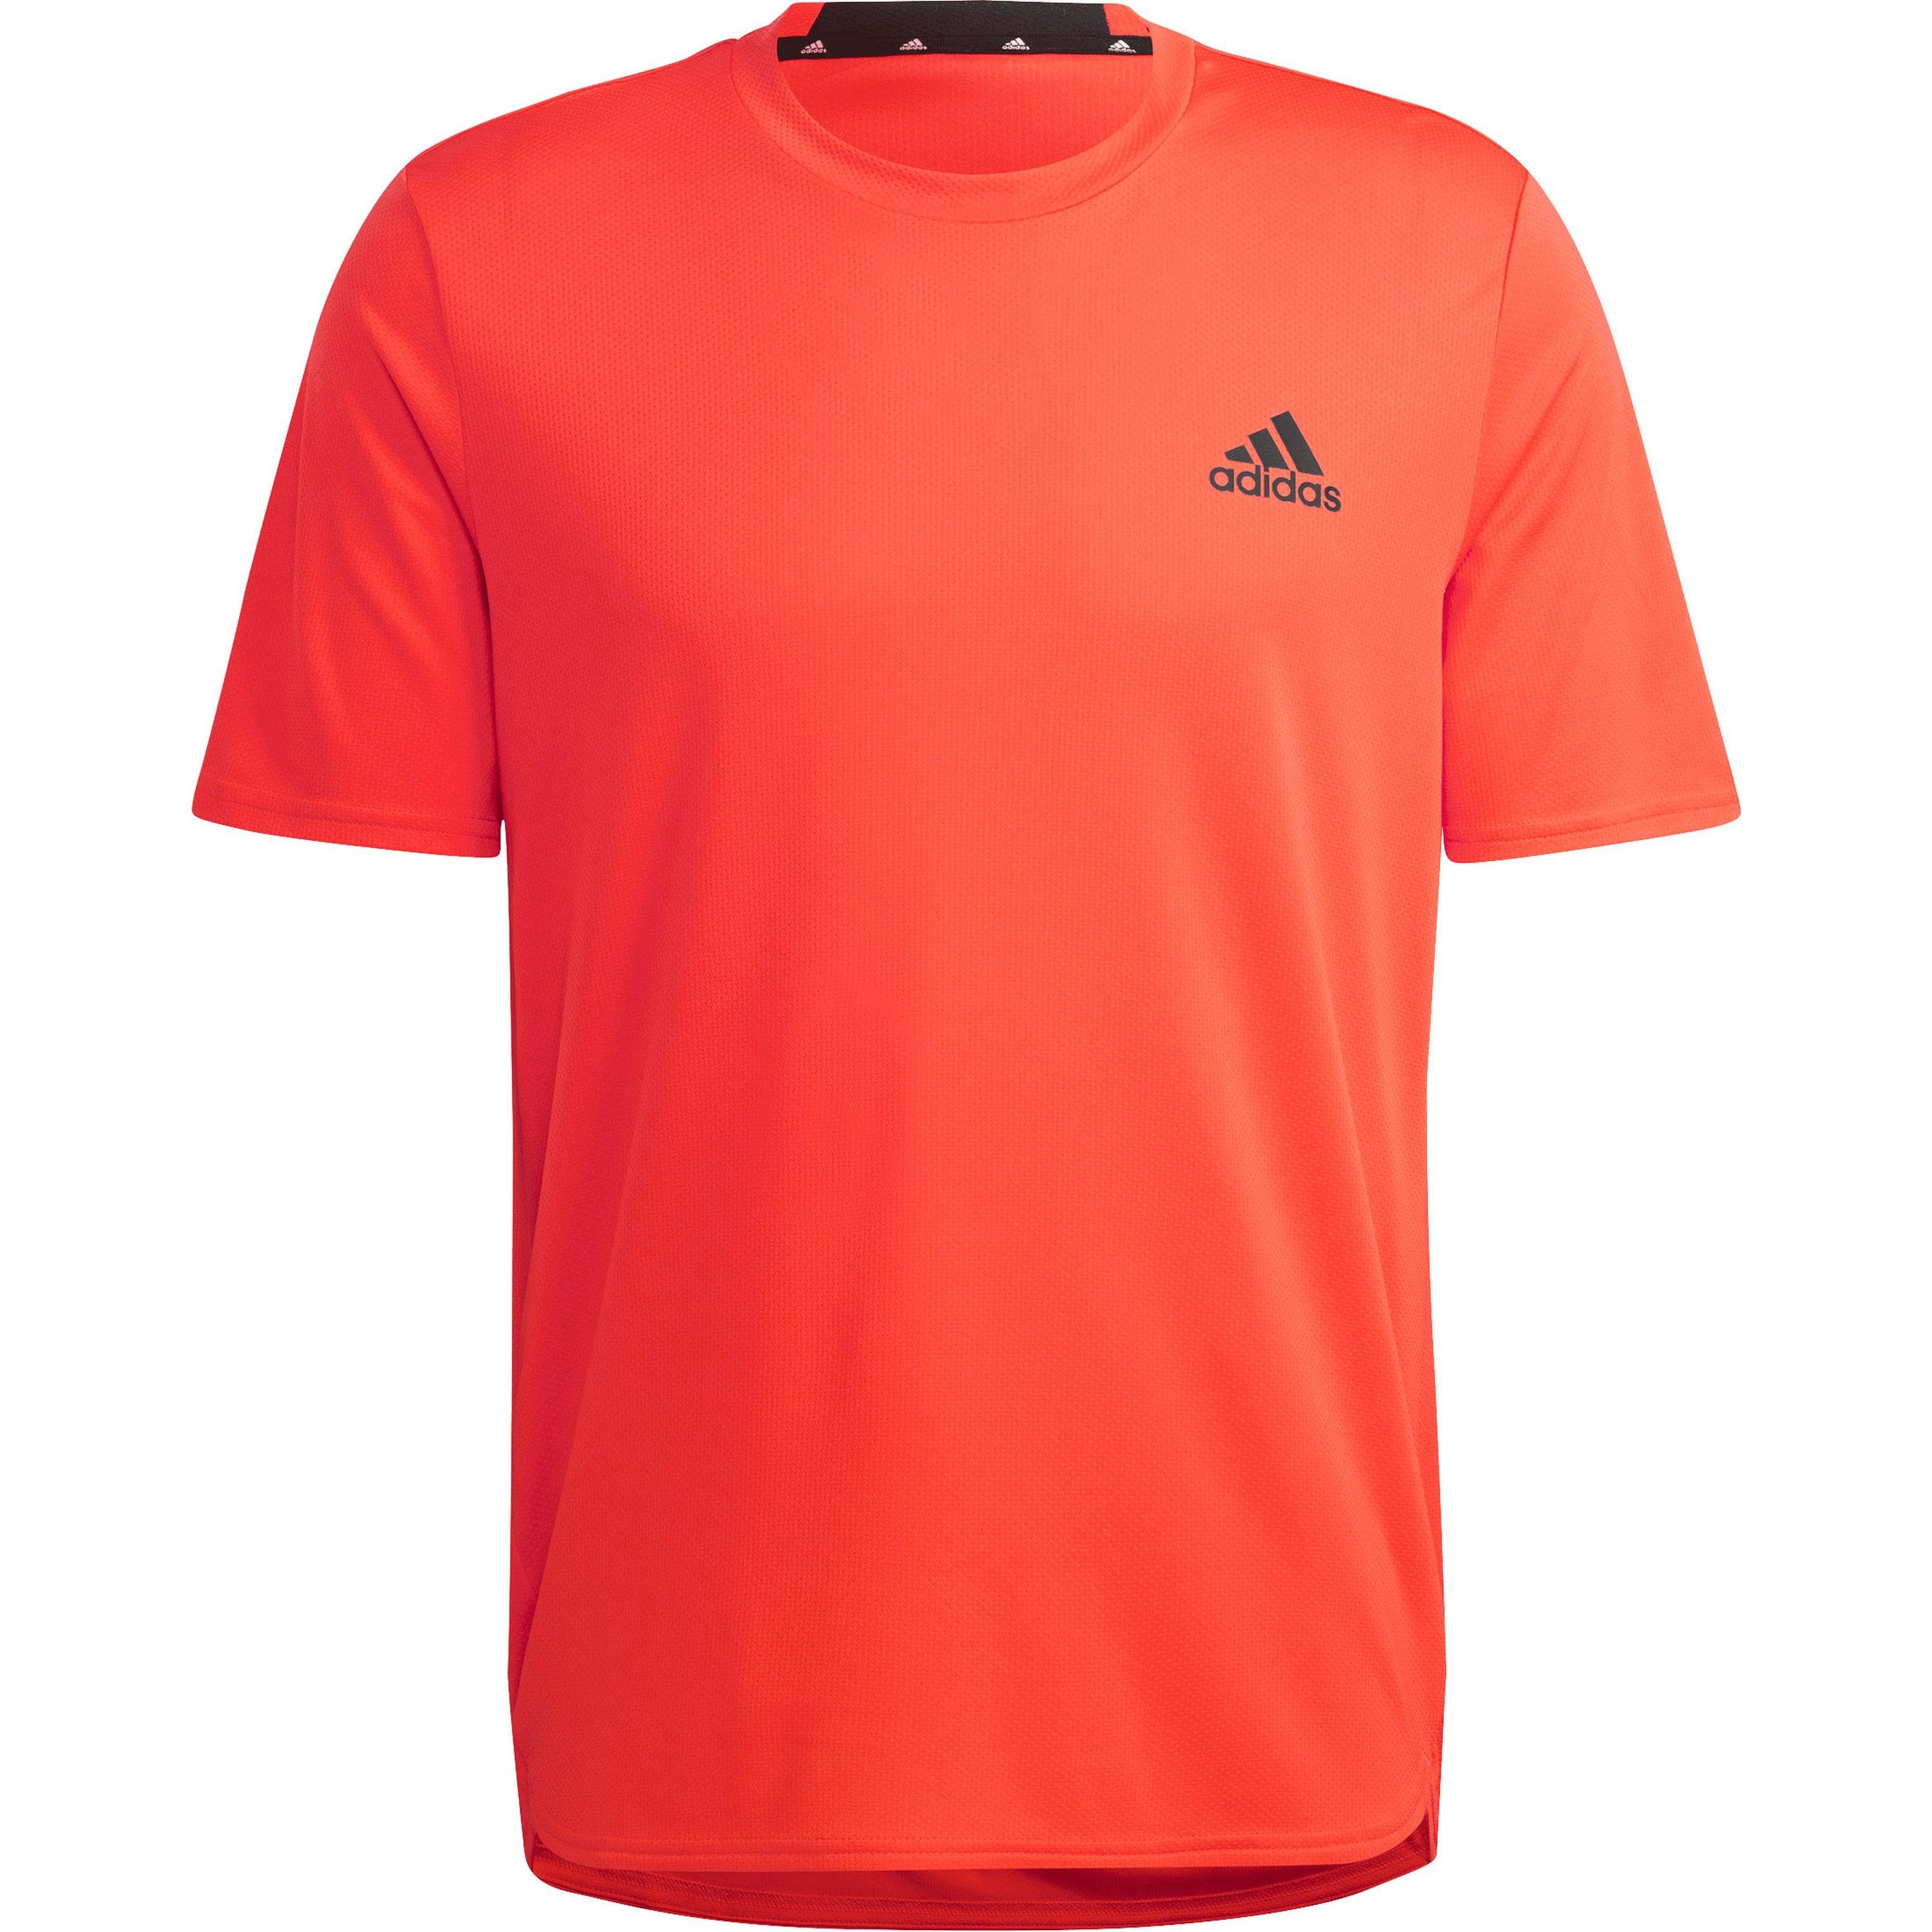 adidas Performance Funktionsshirt AEROREADY bright MOVEMENT FOR DESIGNED red-black